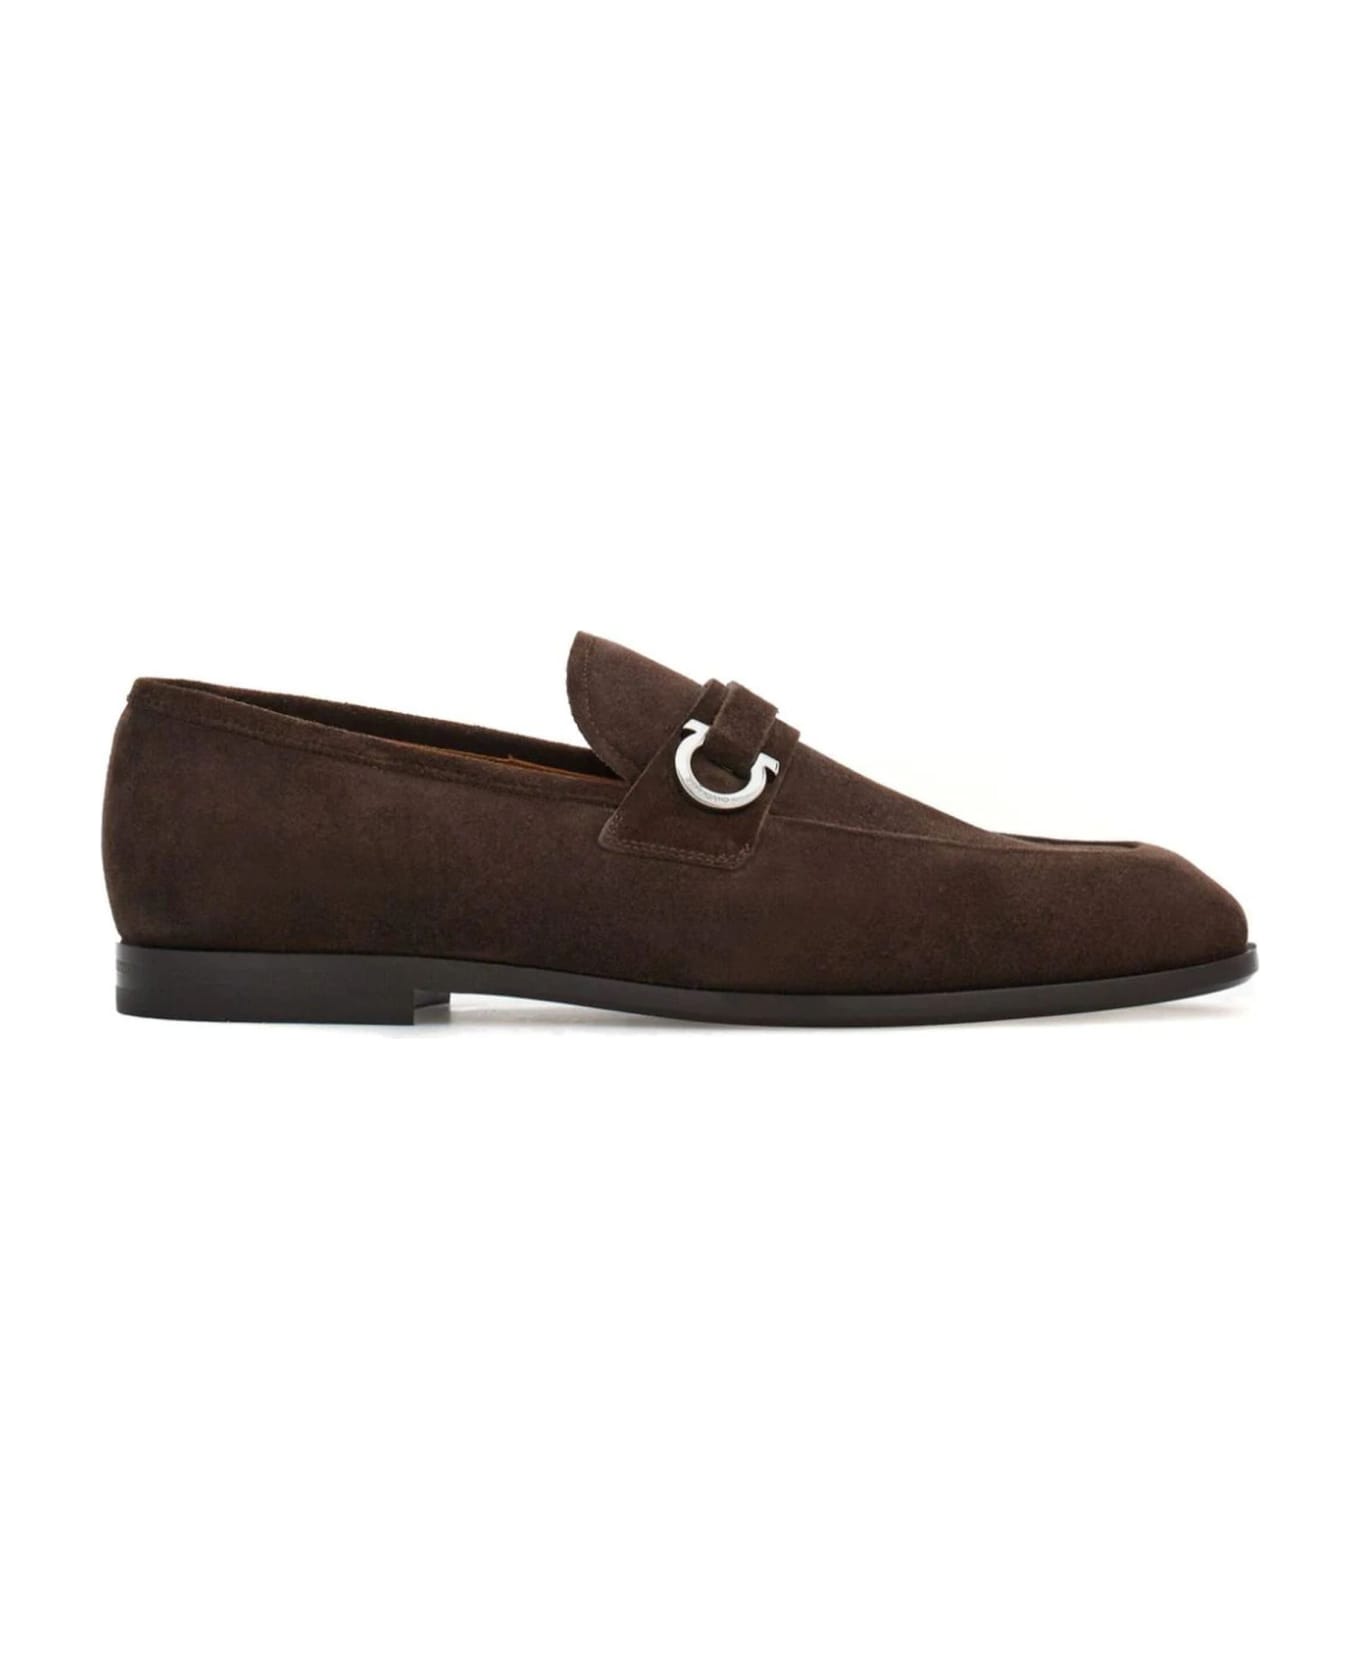 Ferragamo Brown Suede Leather Loafer - Brown ローファー＆デッキシューズ